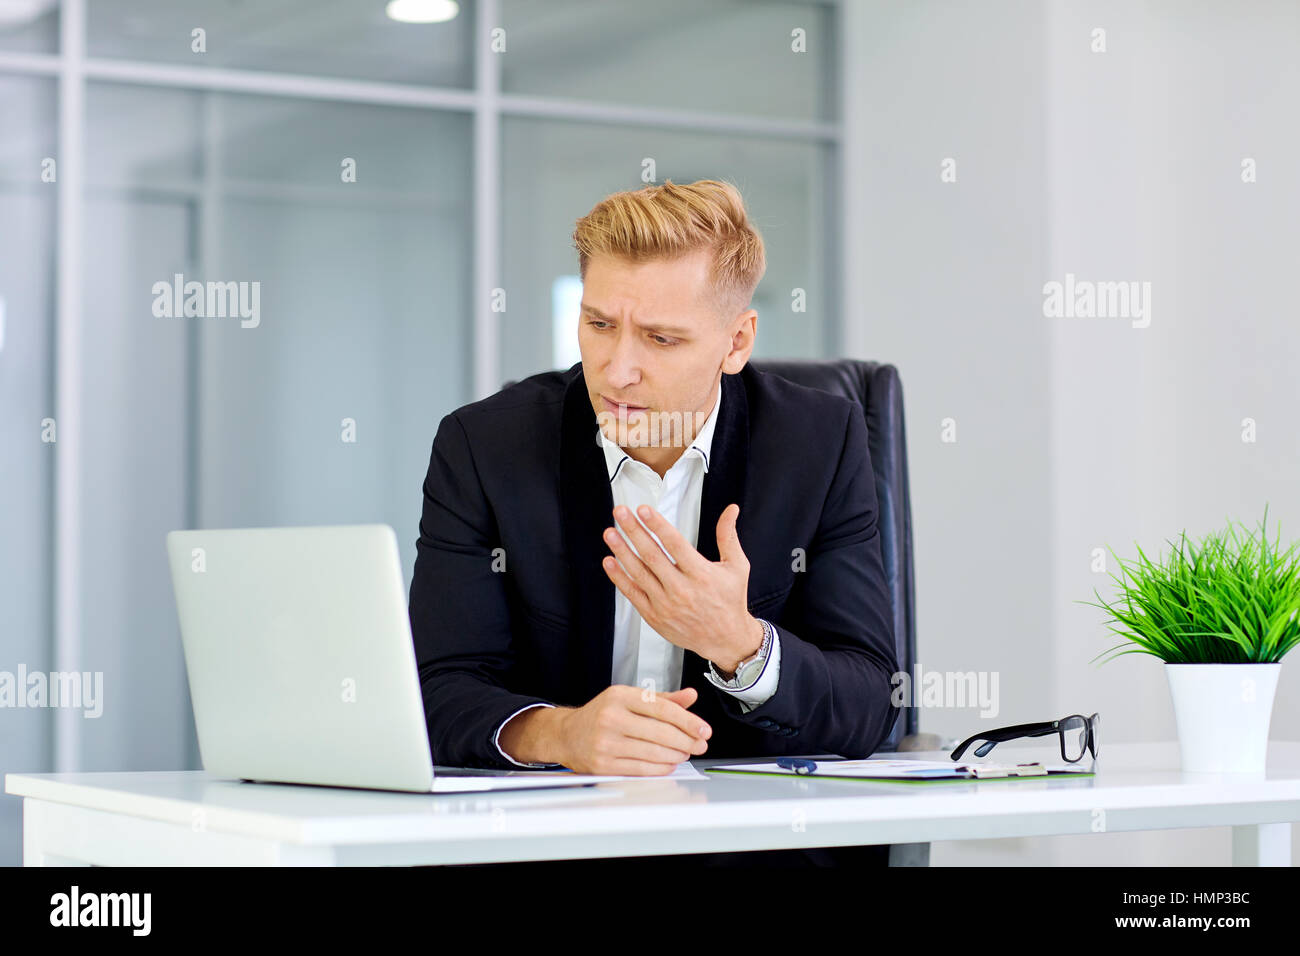 The concept of failure, defeat,  crisis the business. A man sits Stock Photo